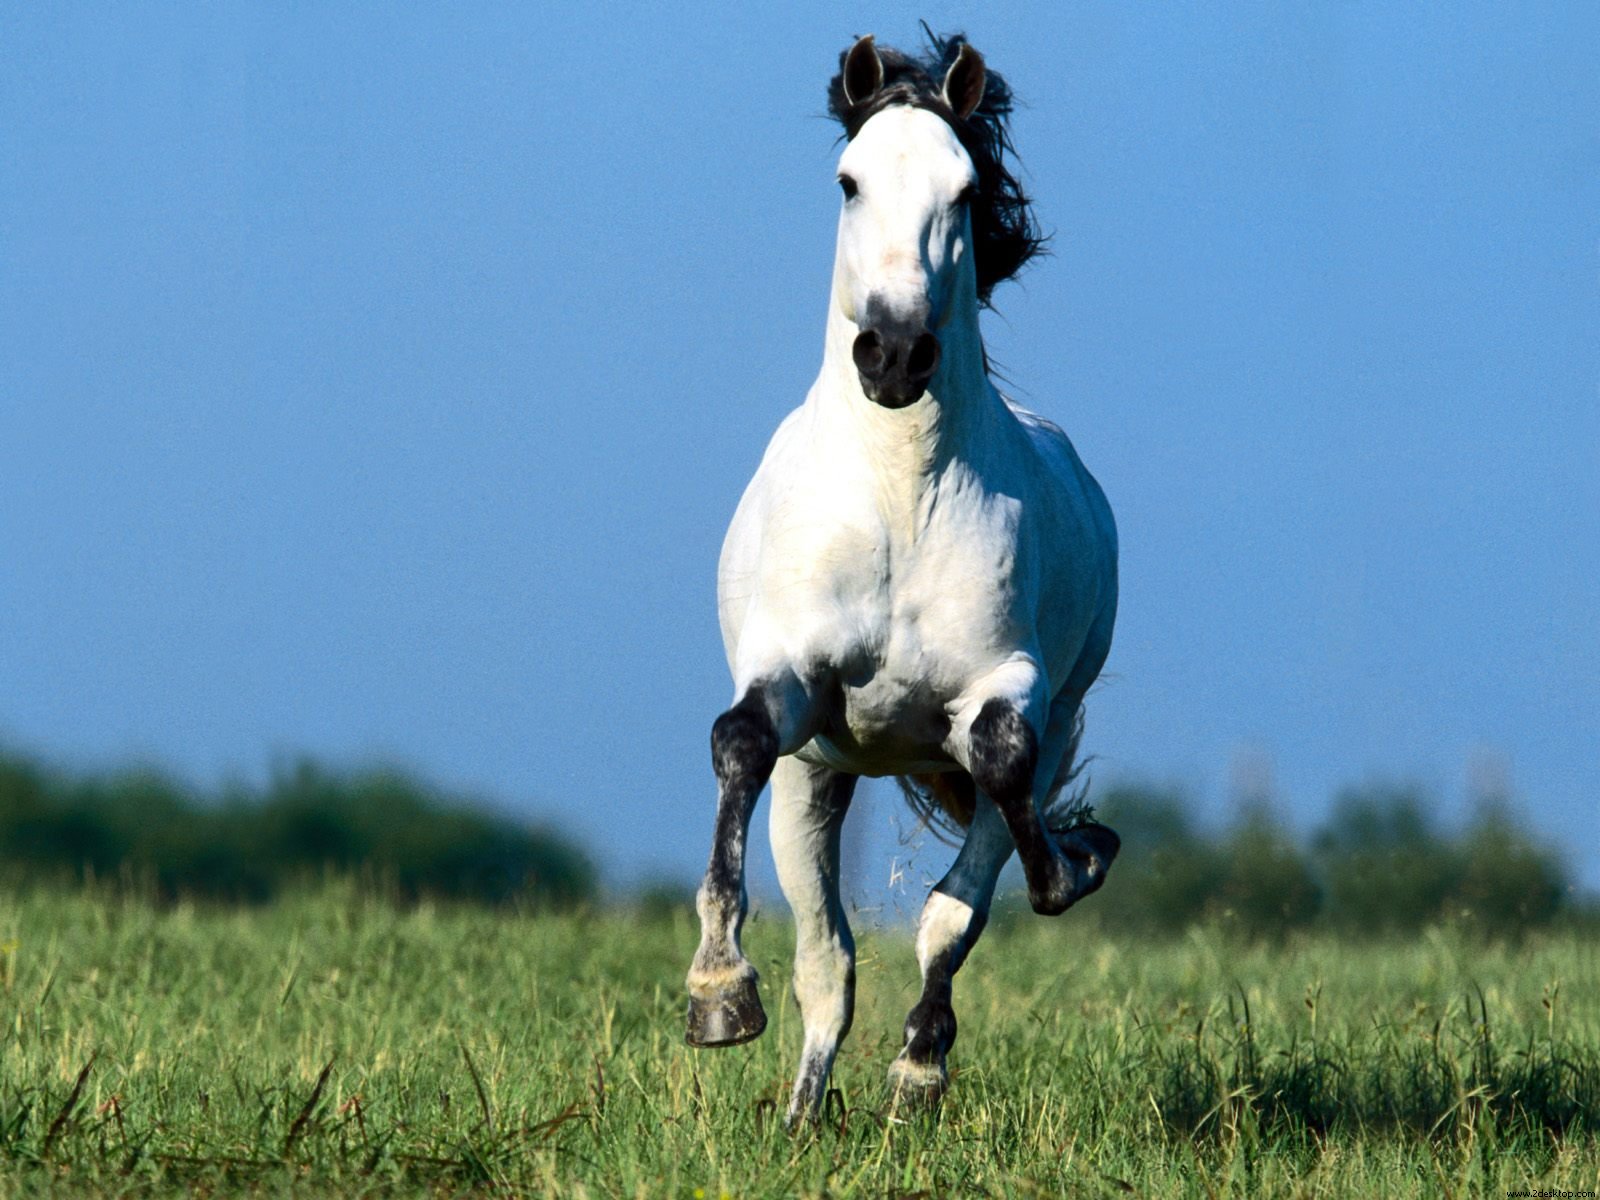 running white horse backgrounds black and white horse background 1600x1200